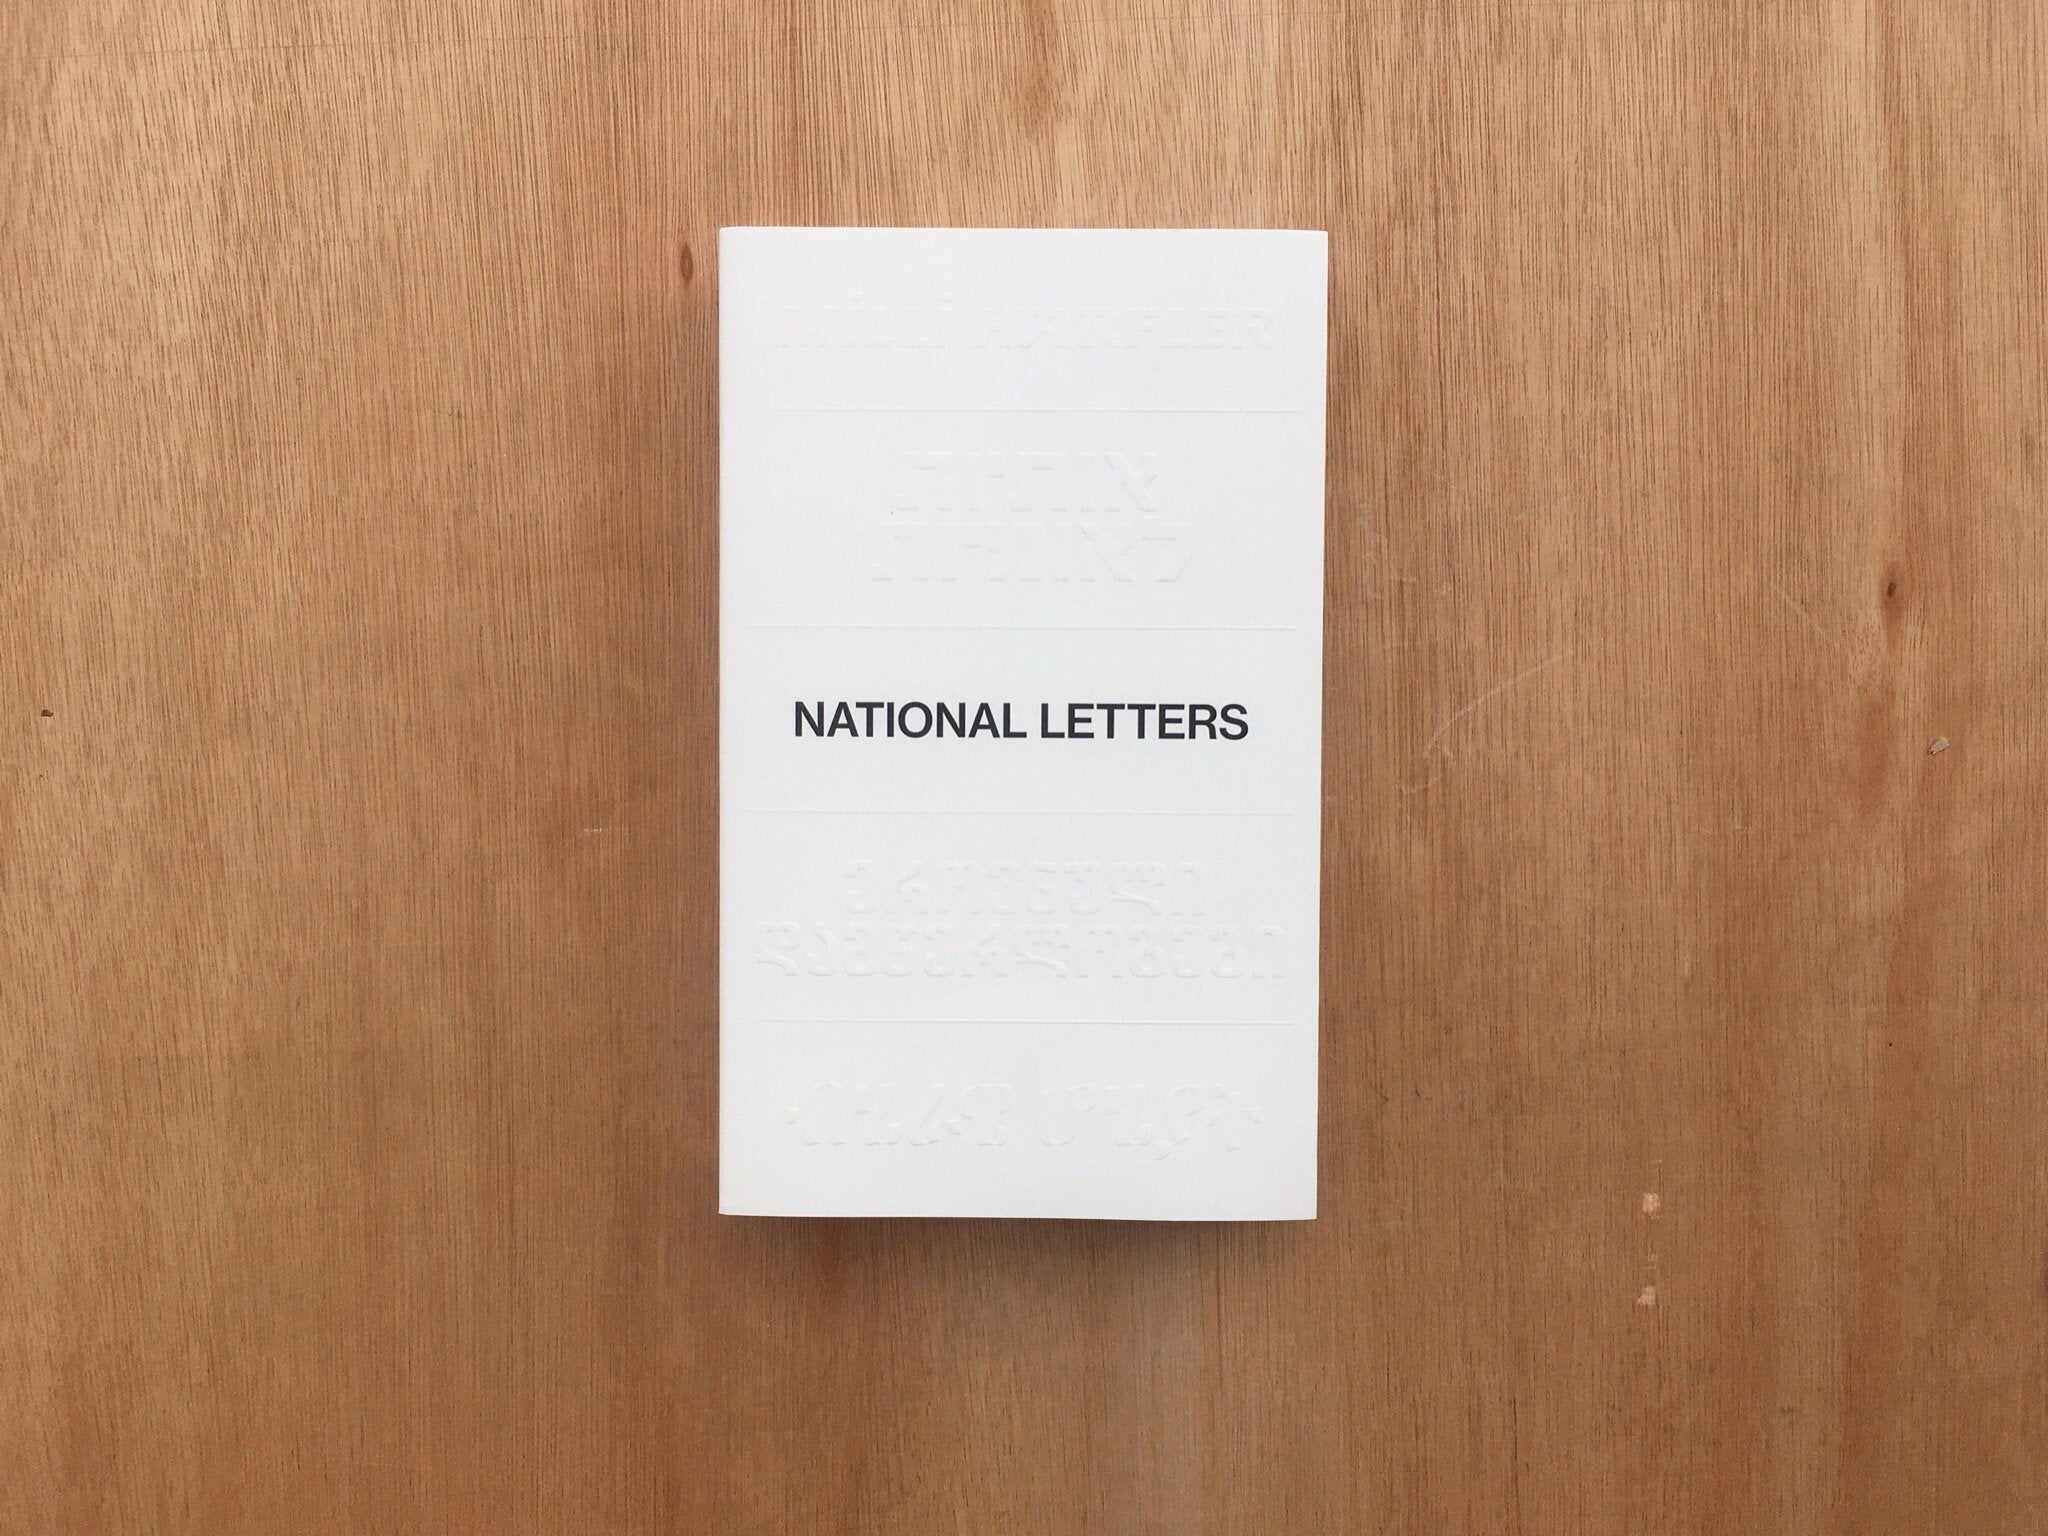 NATIONAL LETTERS: LANGUAGES & SCRIPTS AS NATION-BUILDING TOOLS by Marek Nedelka